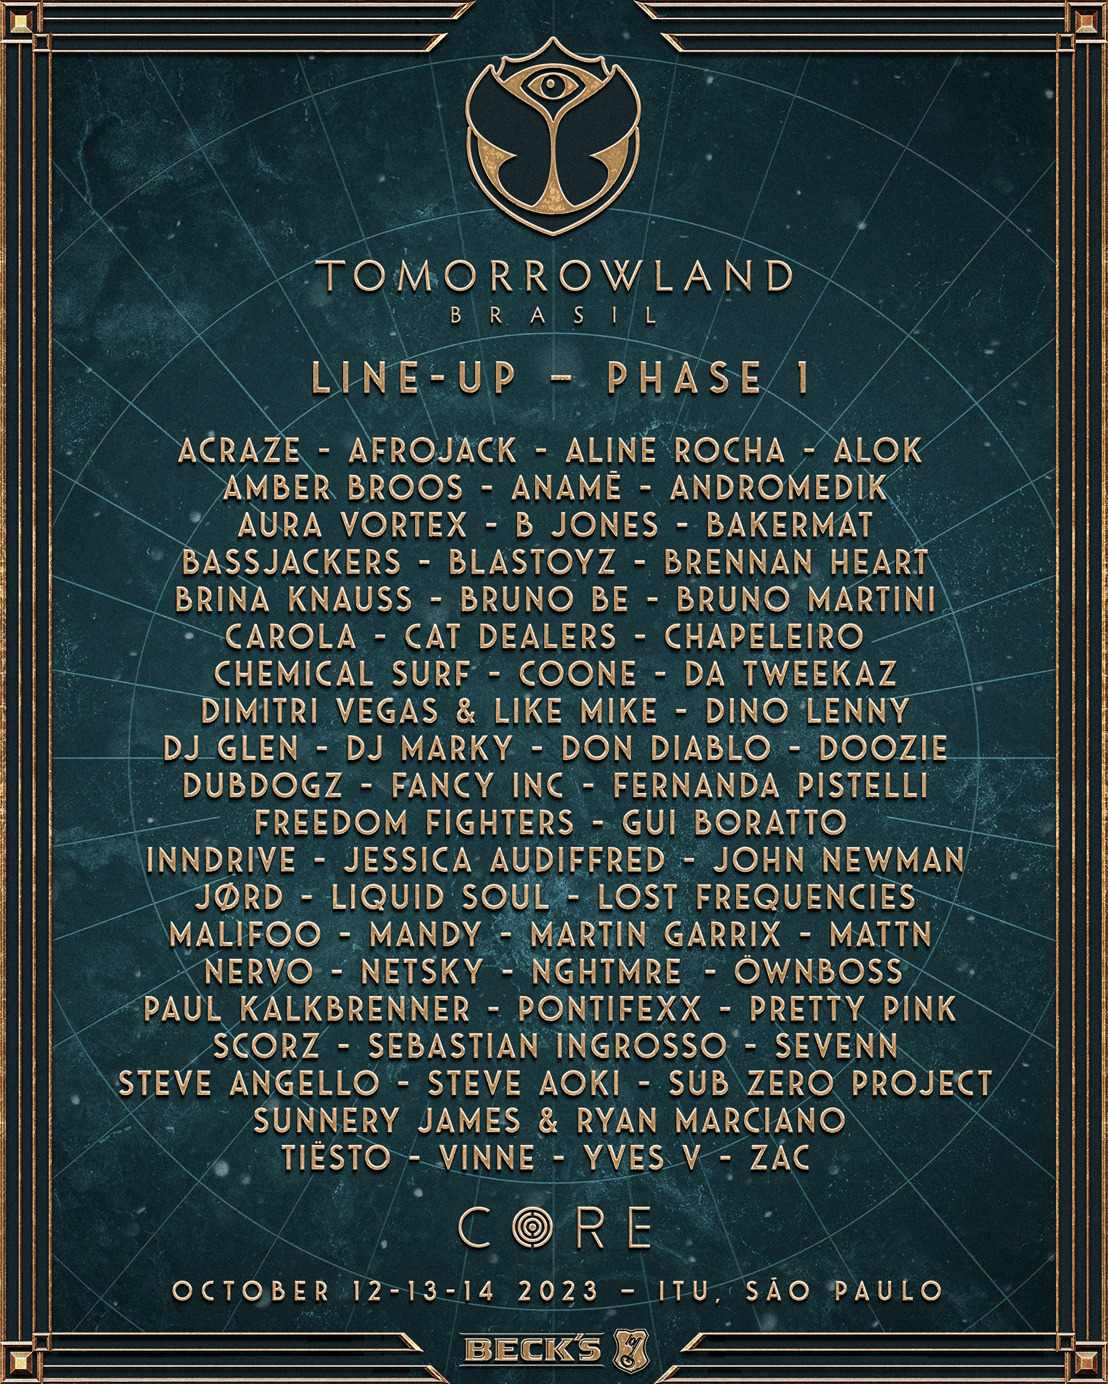 Discover phase 1 of the line-up for Tomorrowland Brasil 2023, tickets go on sale this Thursday